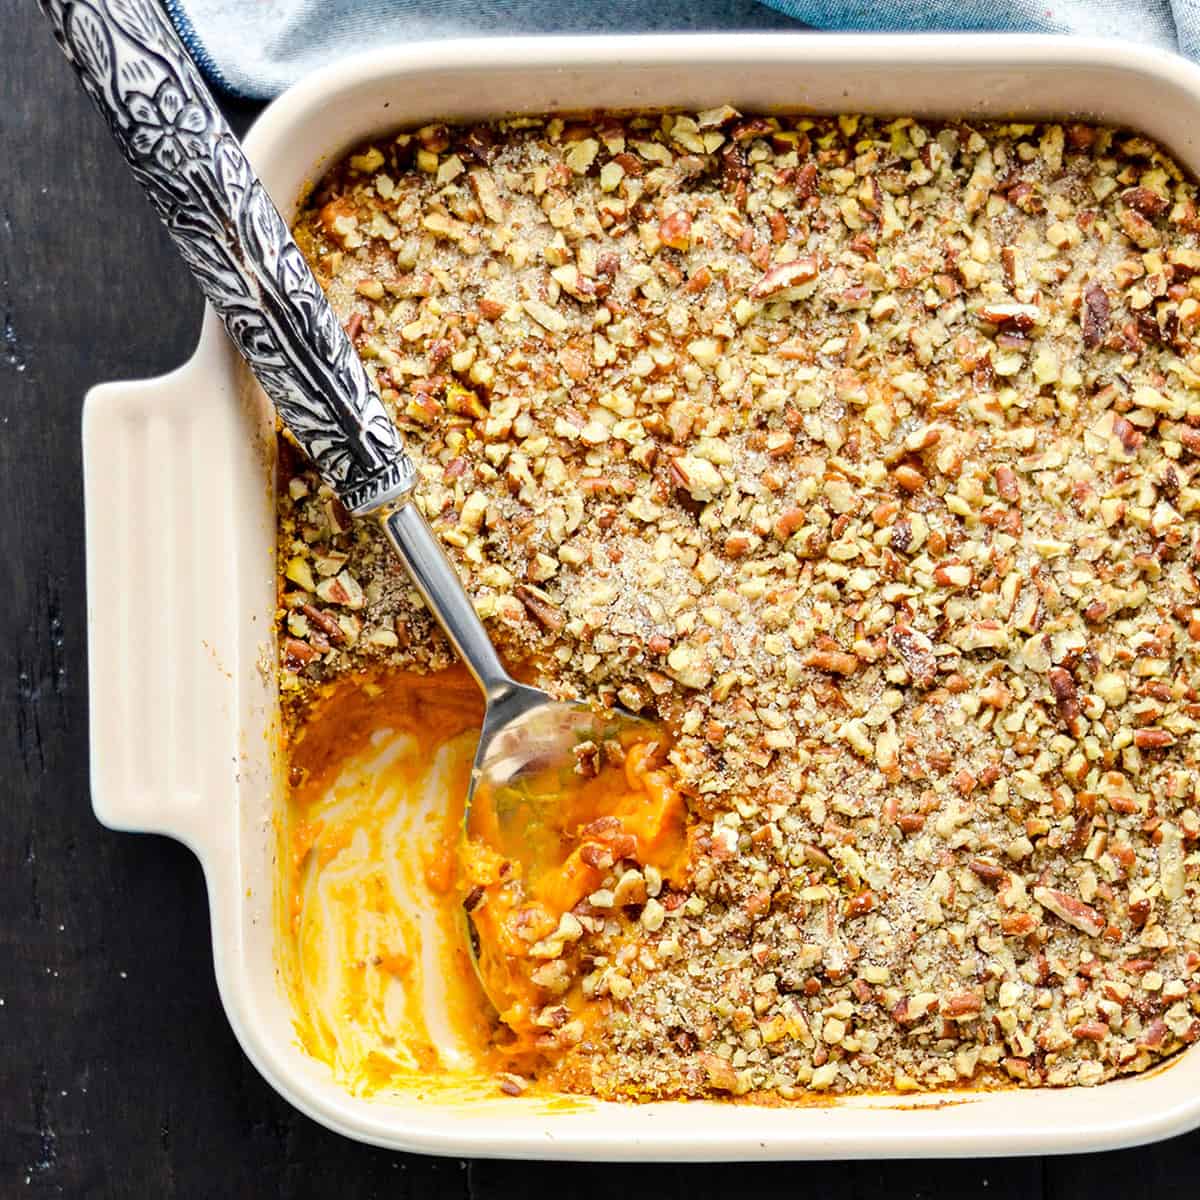 Overhead view of a healthy sweet potato casserole in a square baking dish with some missing and a spoon scooping more out of it 